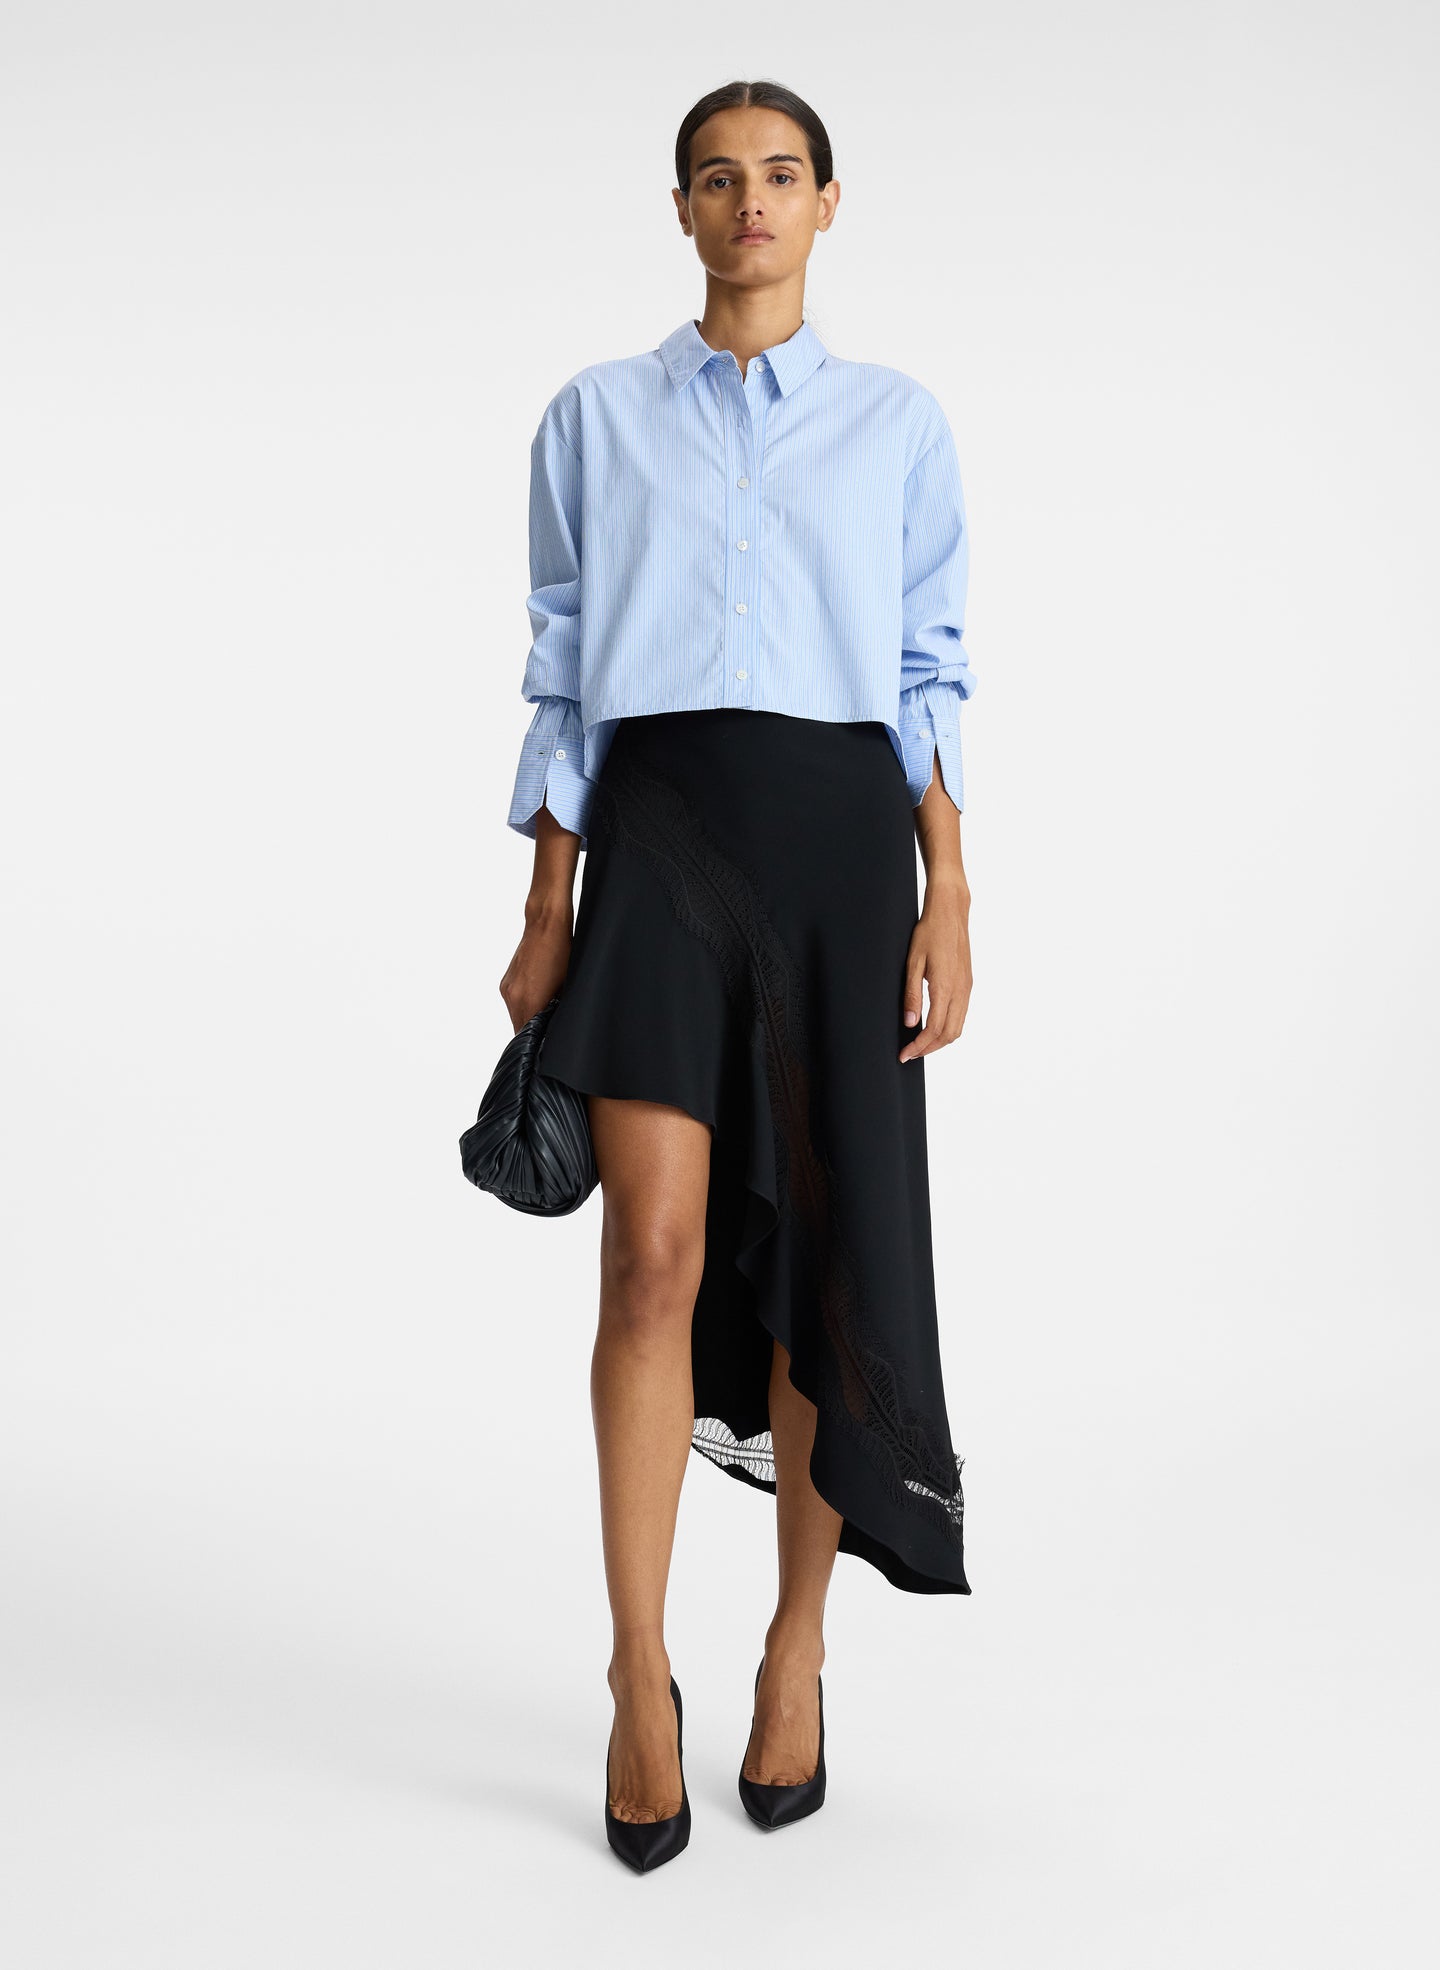 front view of woman wearing blue striped button down collared shirt and asymmetric black satin and lace skirt